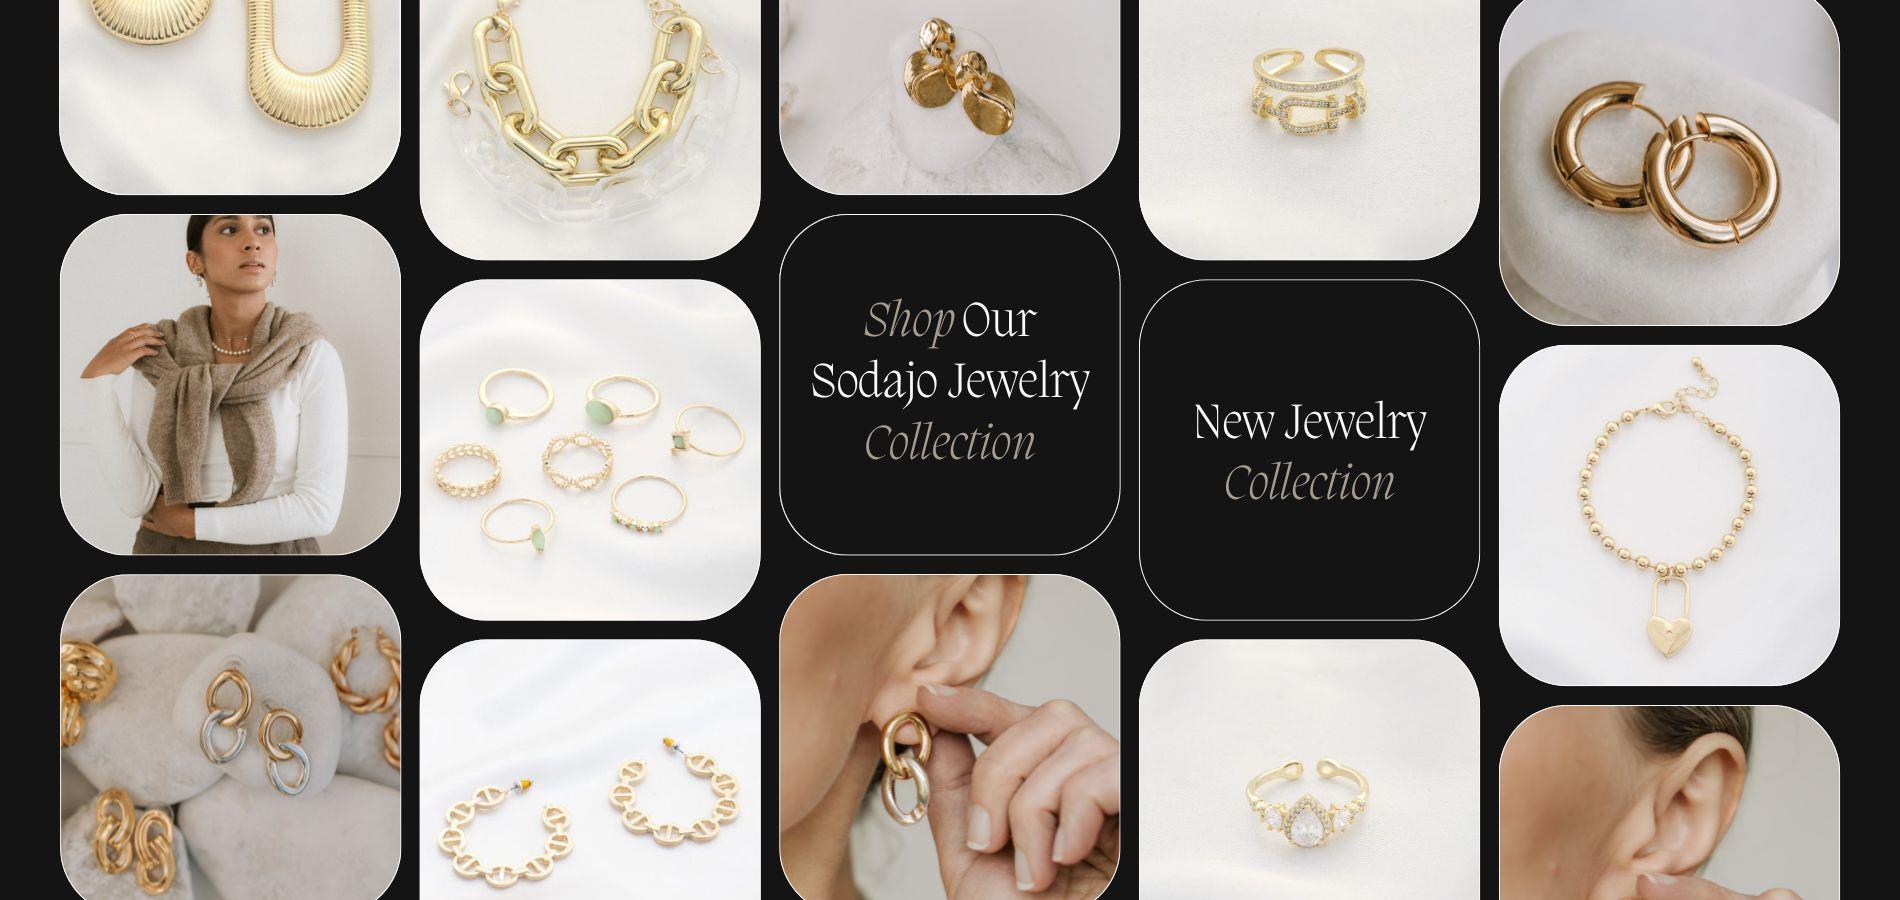 Wholesale Jewelry and Wholesale Accessories|Joia Accessories